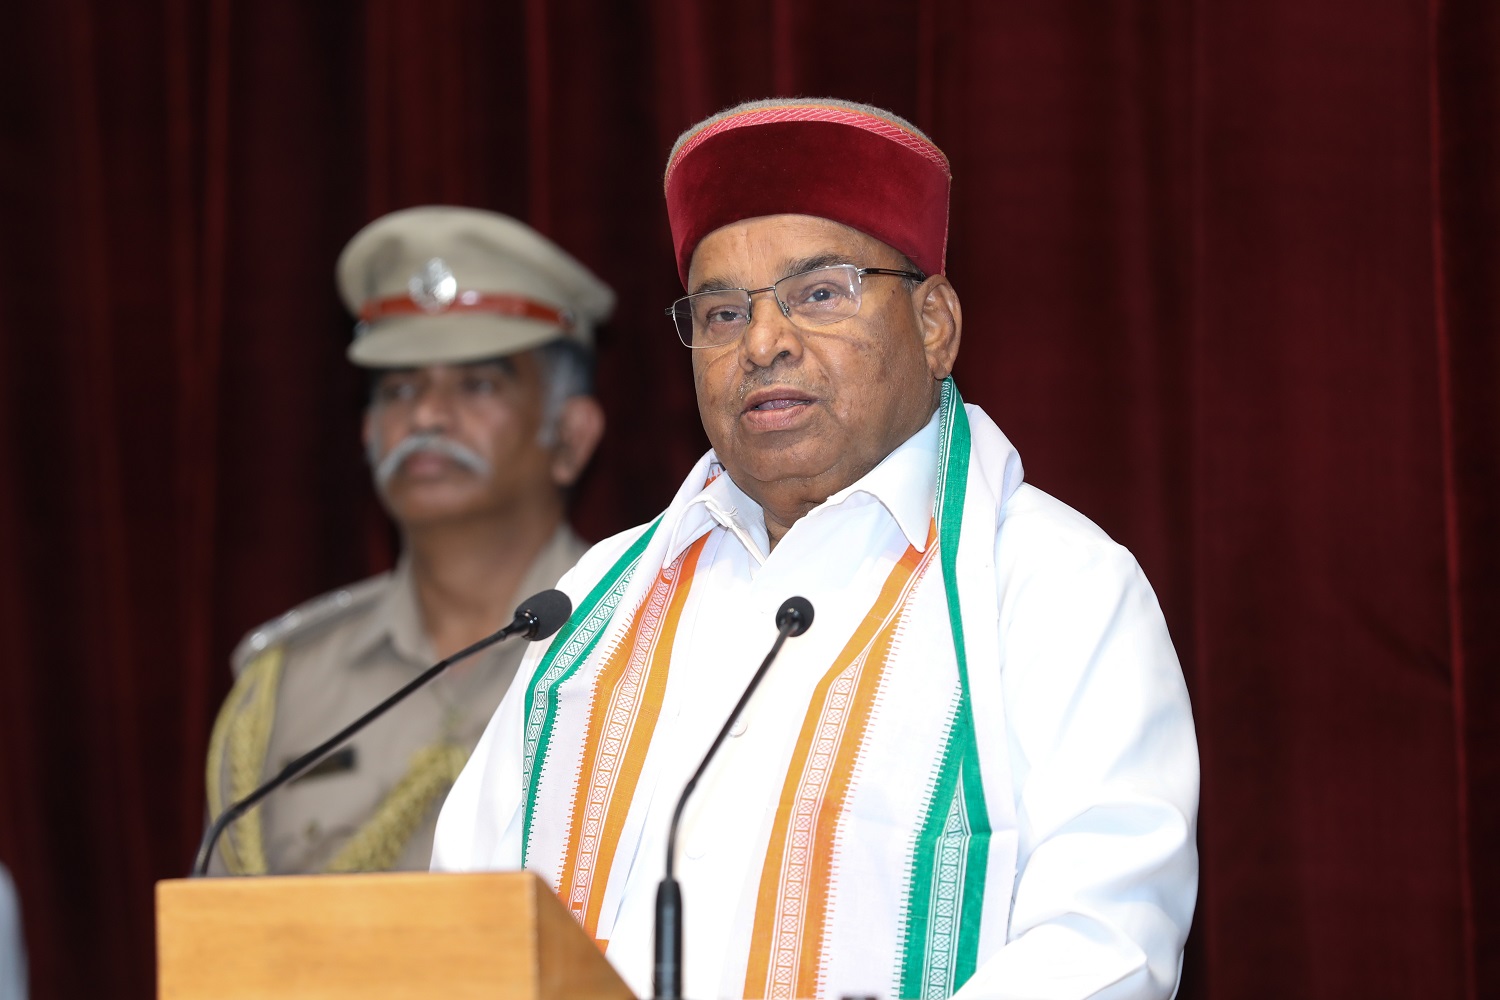 Shri Thaawar Chand Gehlot, Governor of Karnataka, addresses the faculty, staff and students of IIM Bangalore, at the inauguration of MDC Block on IIMB’s second campus on 1ST March 2023.